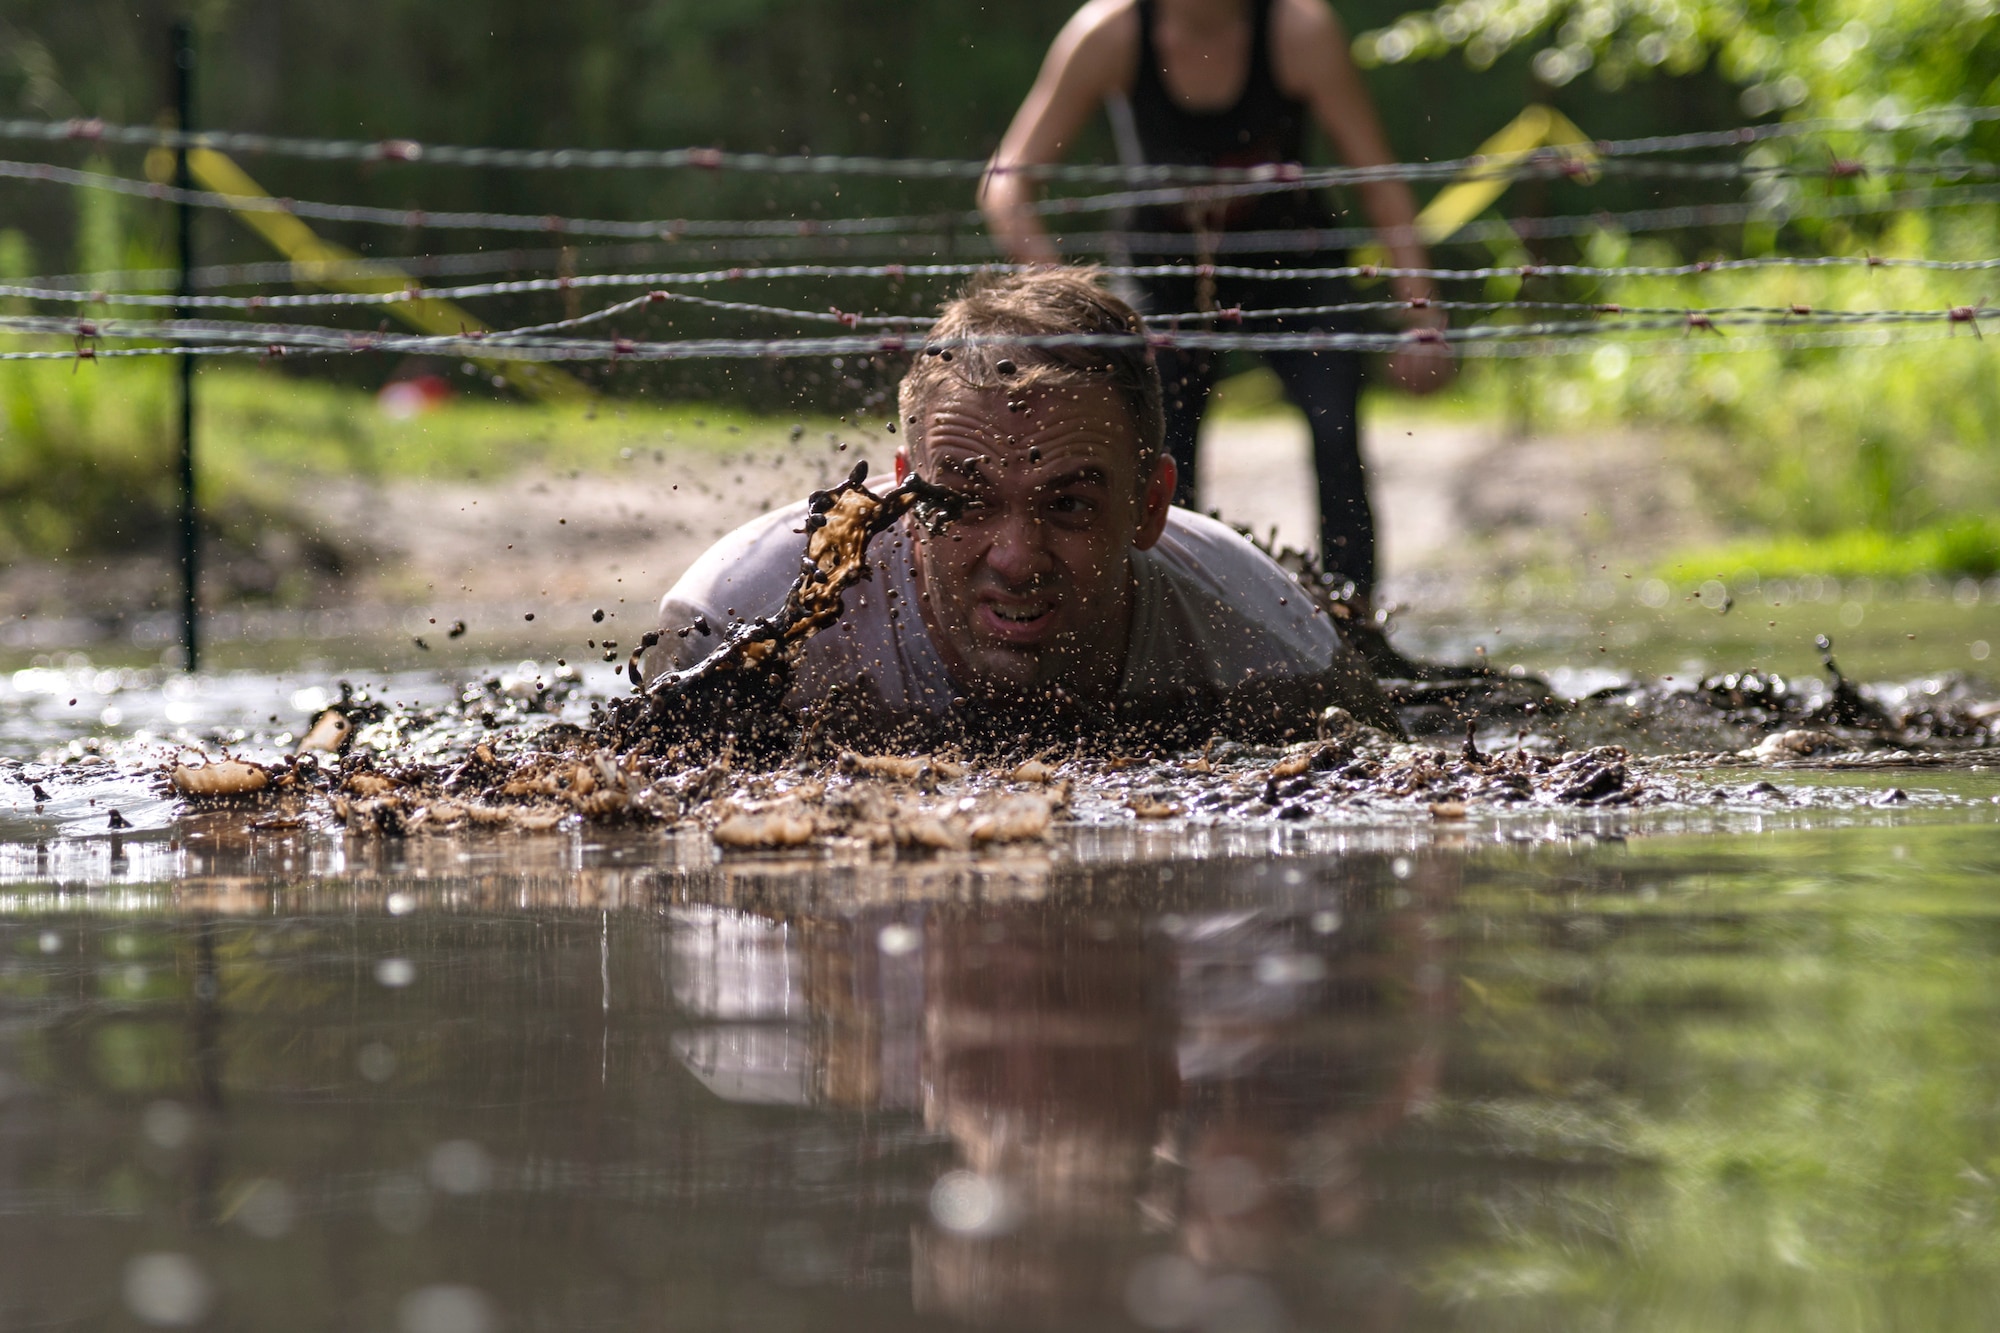 A participant crawls under barbed wire during the Moody Mud Run, May 4, 2019, at Possum Creek Off-Road Park in Ray City, Ga. The sixth annual Moody Mud Run had approximately 850 participants who had to overcome a series of obstacles on the 4 and 5-mile courses. The 32-obstacle course gave Airmen, families and the local community an opportunity to build camaraderie and teamwork skills. (U.S. Air Force Photo by Airman 1st Class Taryn Butler)